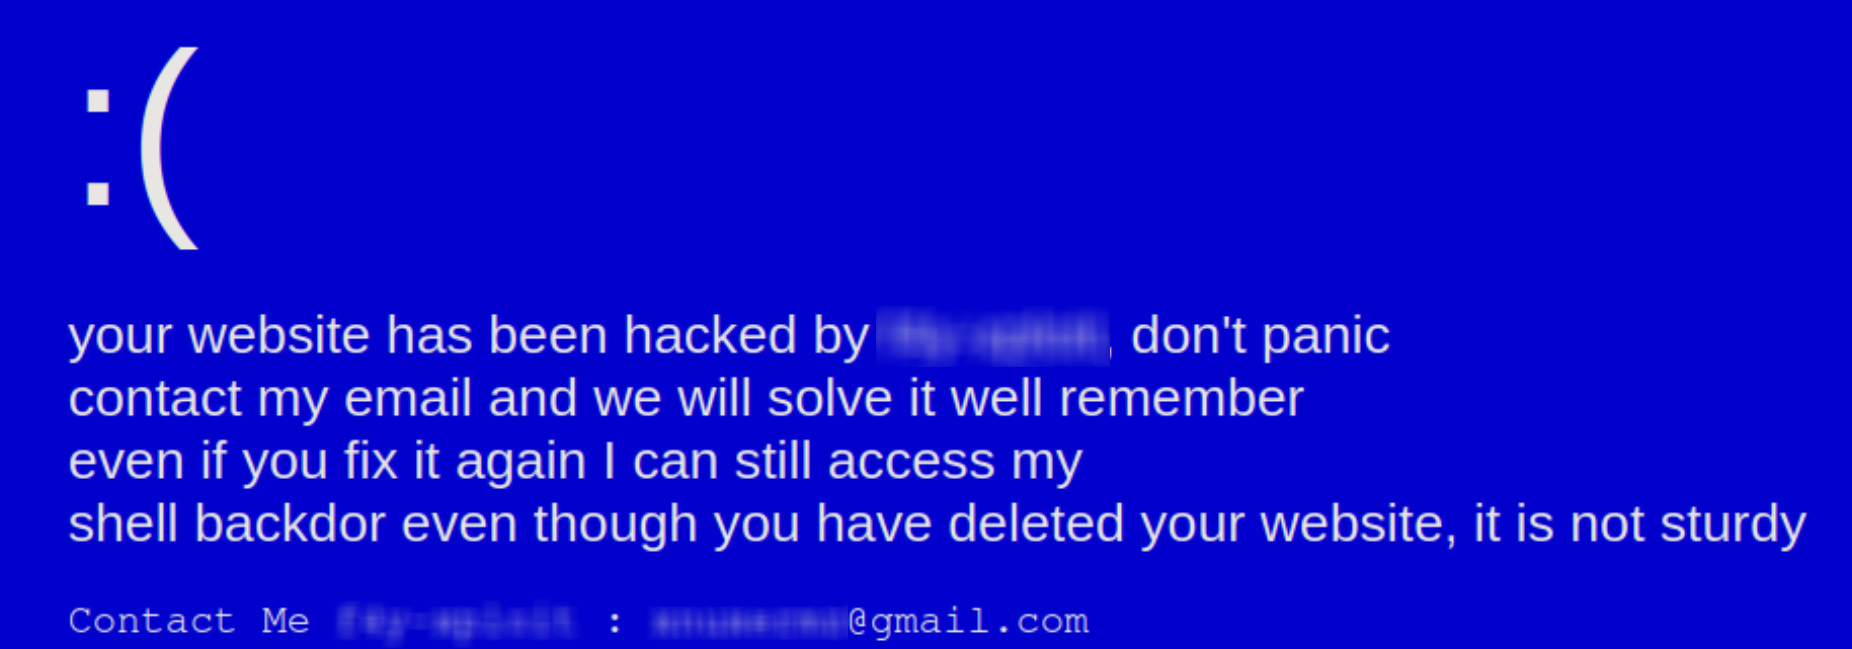 Blue screen text with website defacement